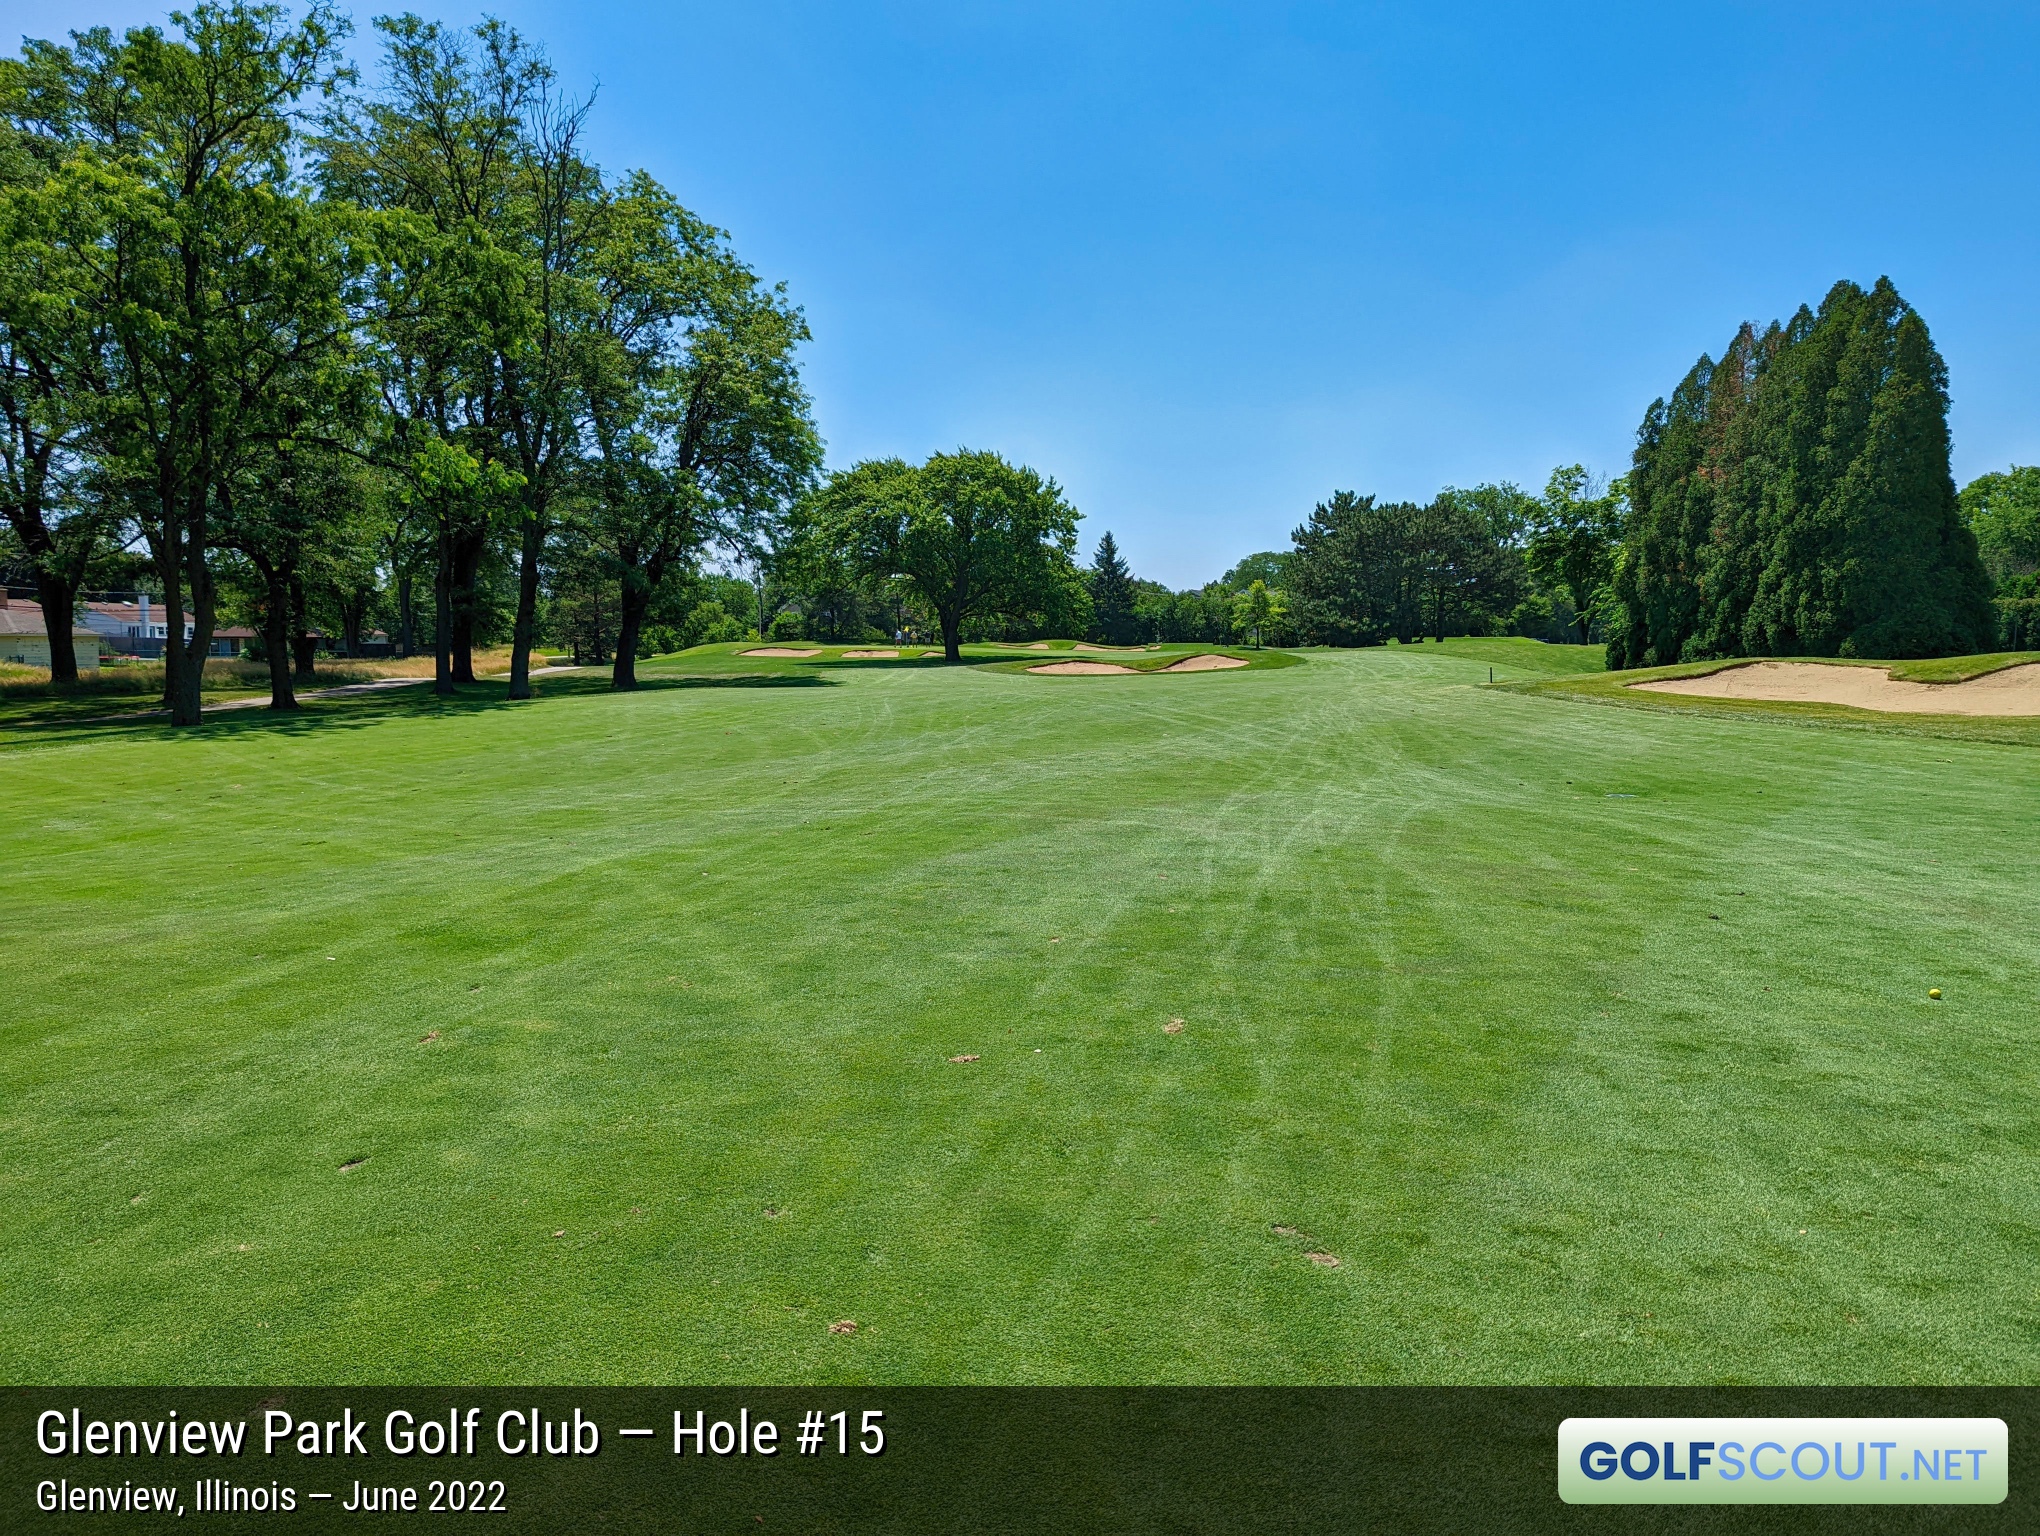 Photo of hole #15 at Glenview Park Golf Club in Glenview, Illinois. 